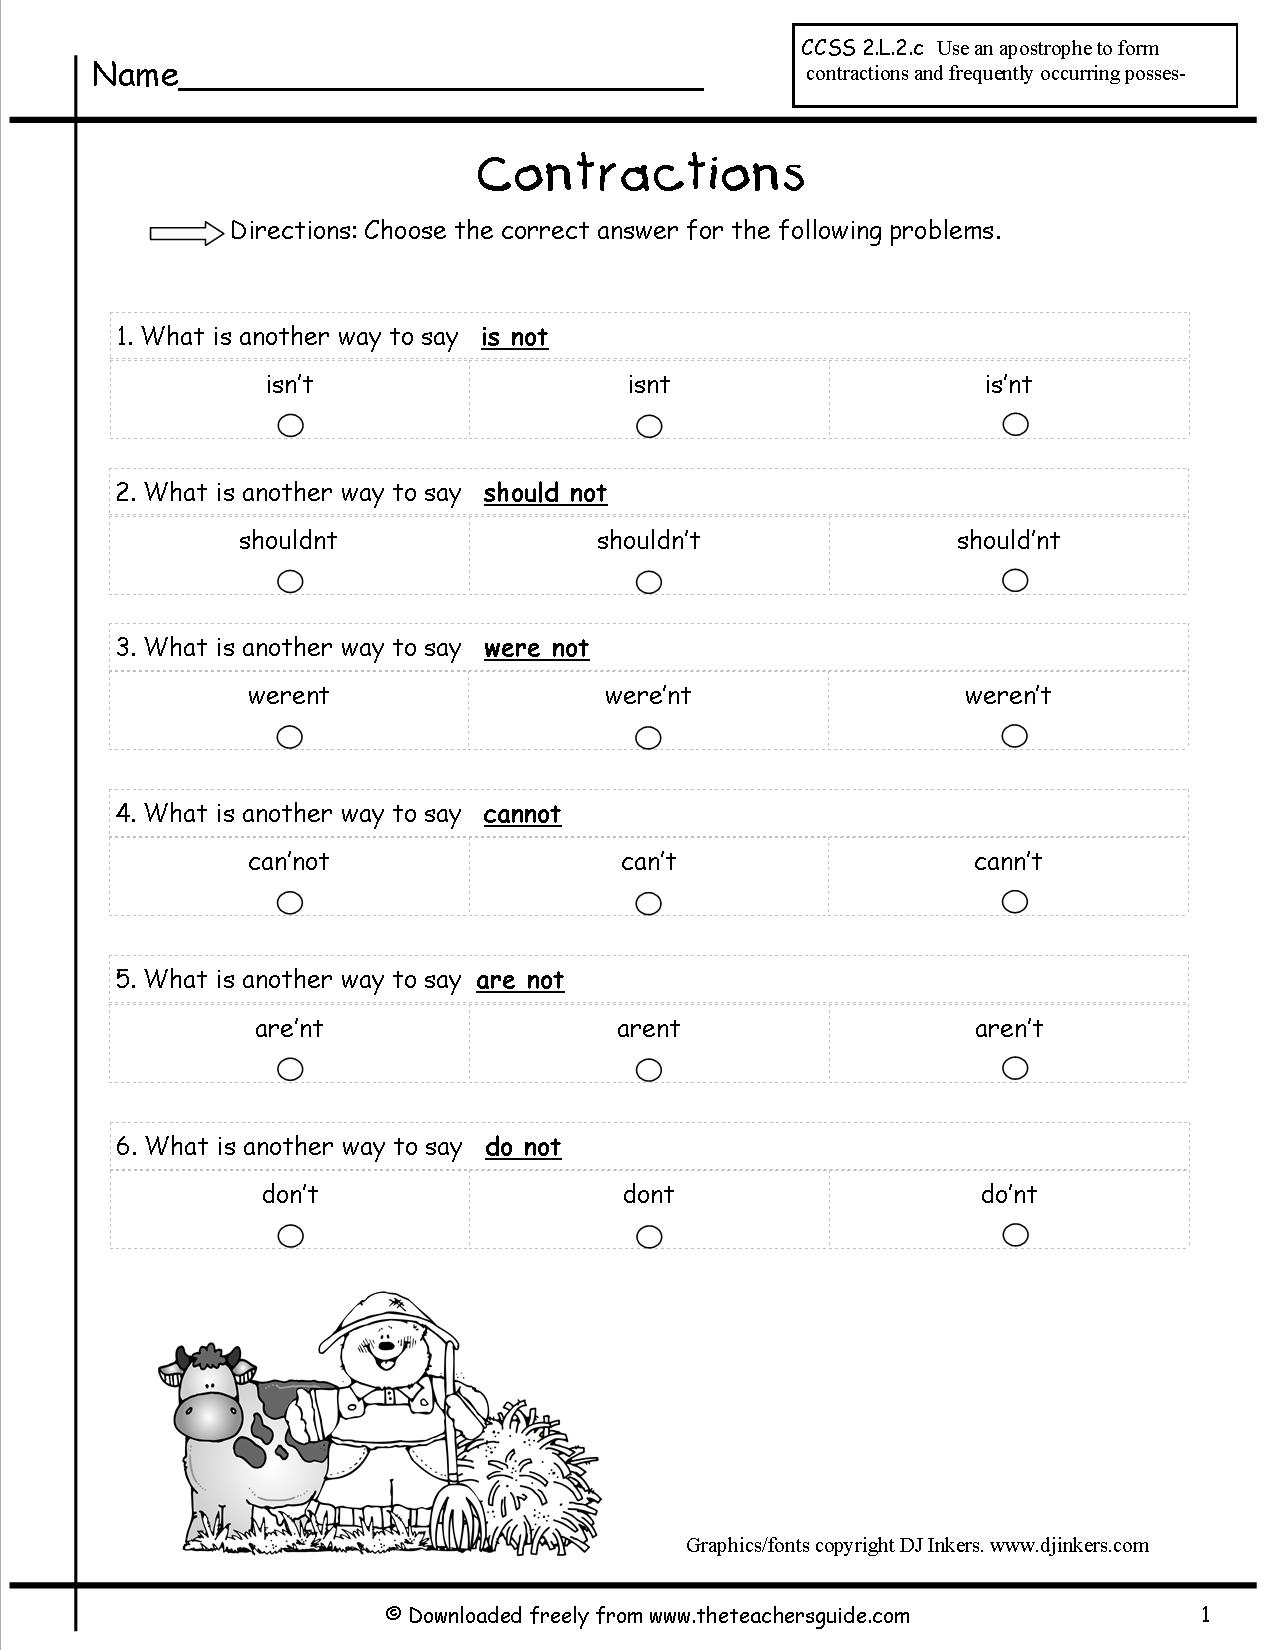 Contractions Worksheet Image